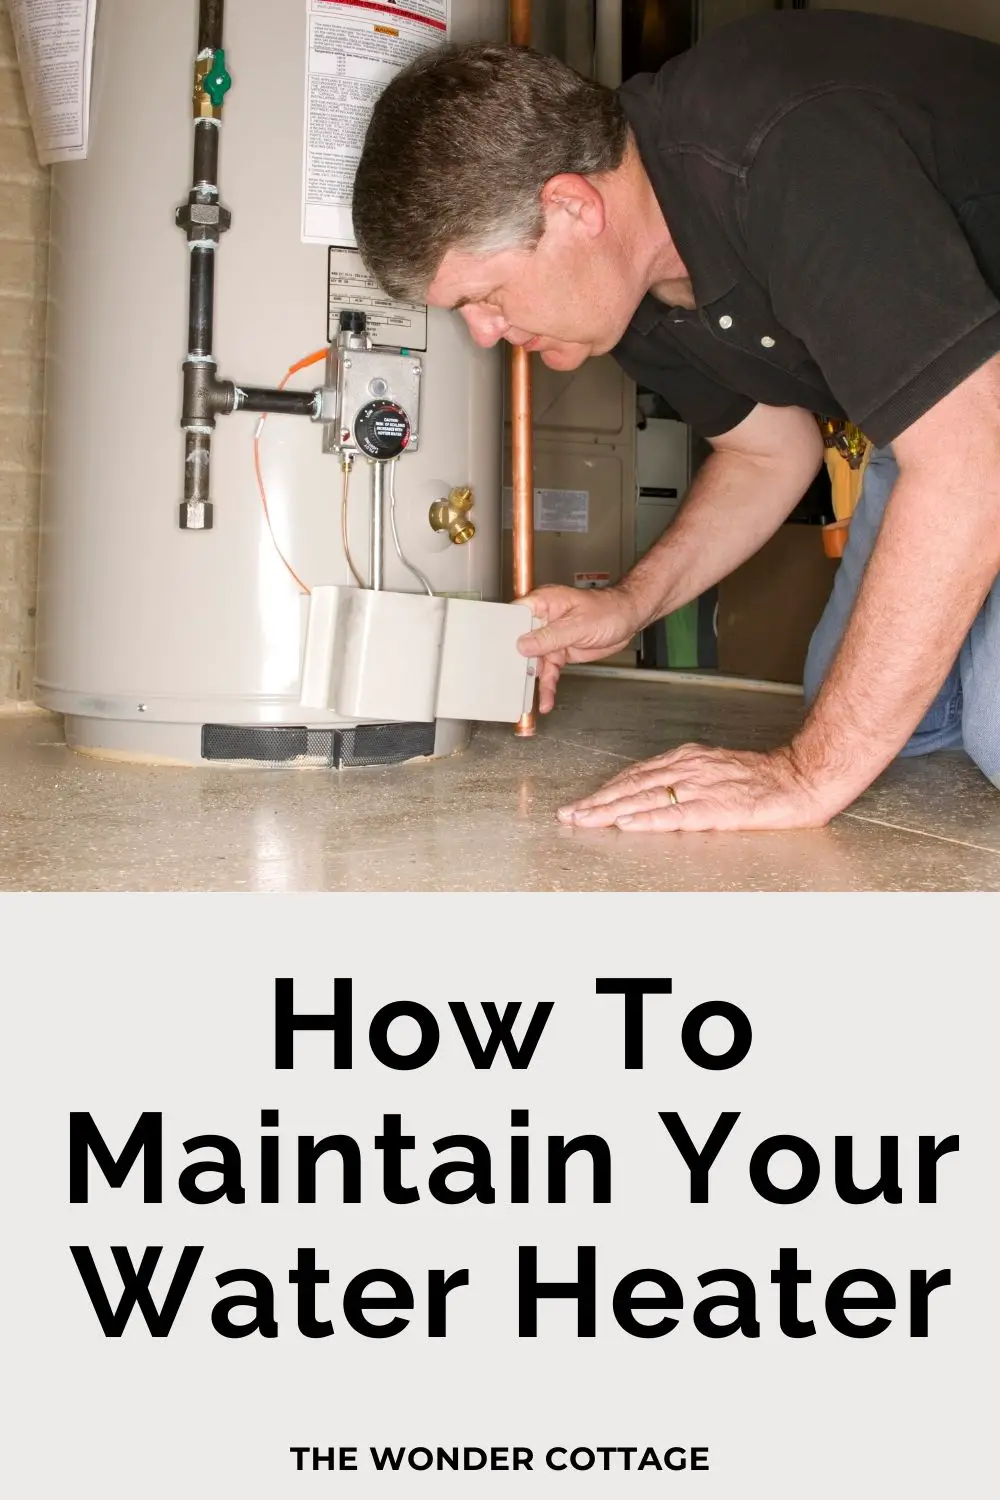 How to maintain your water heater